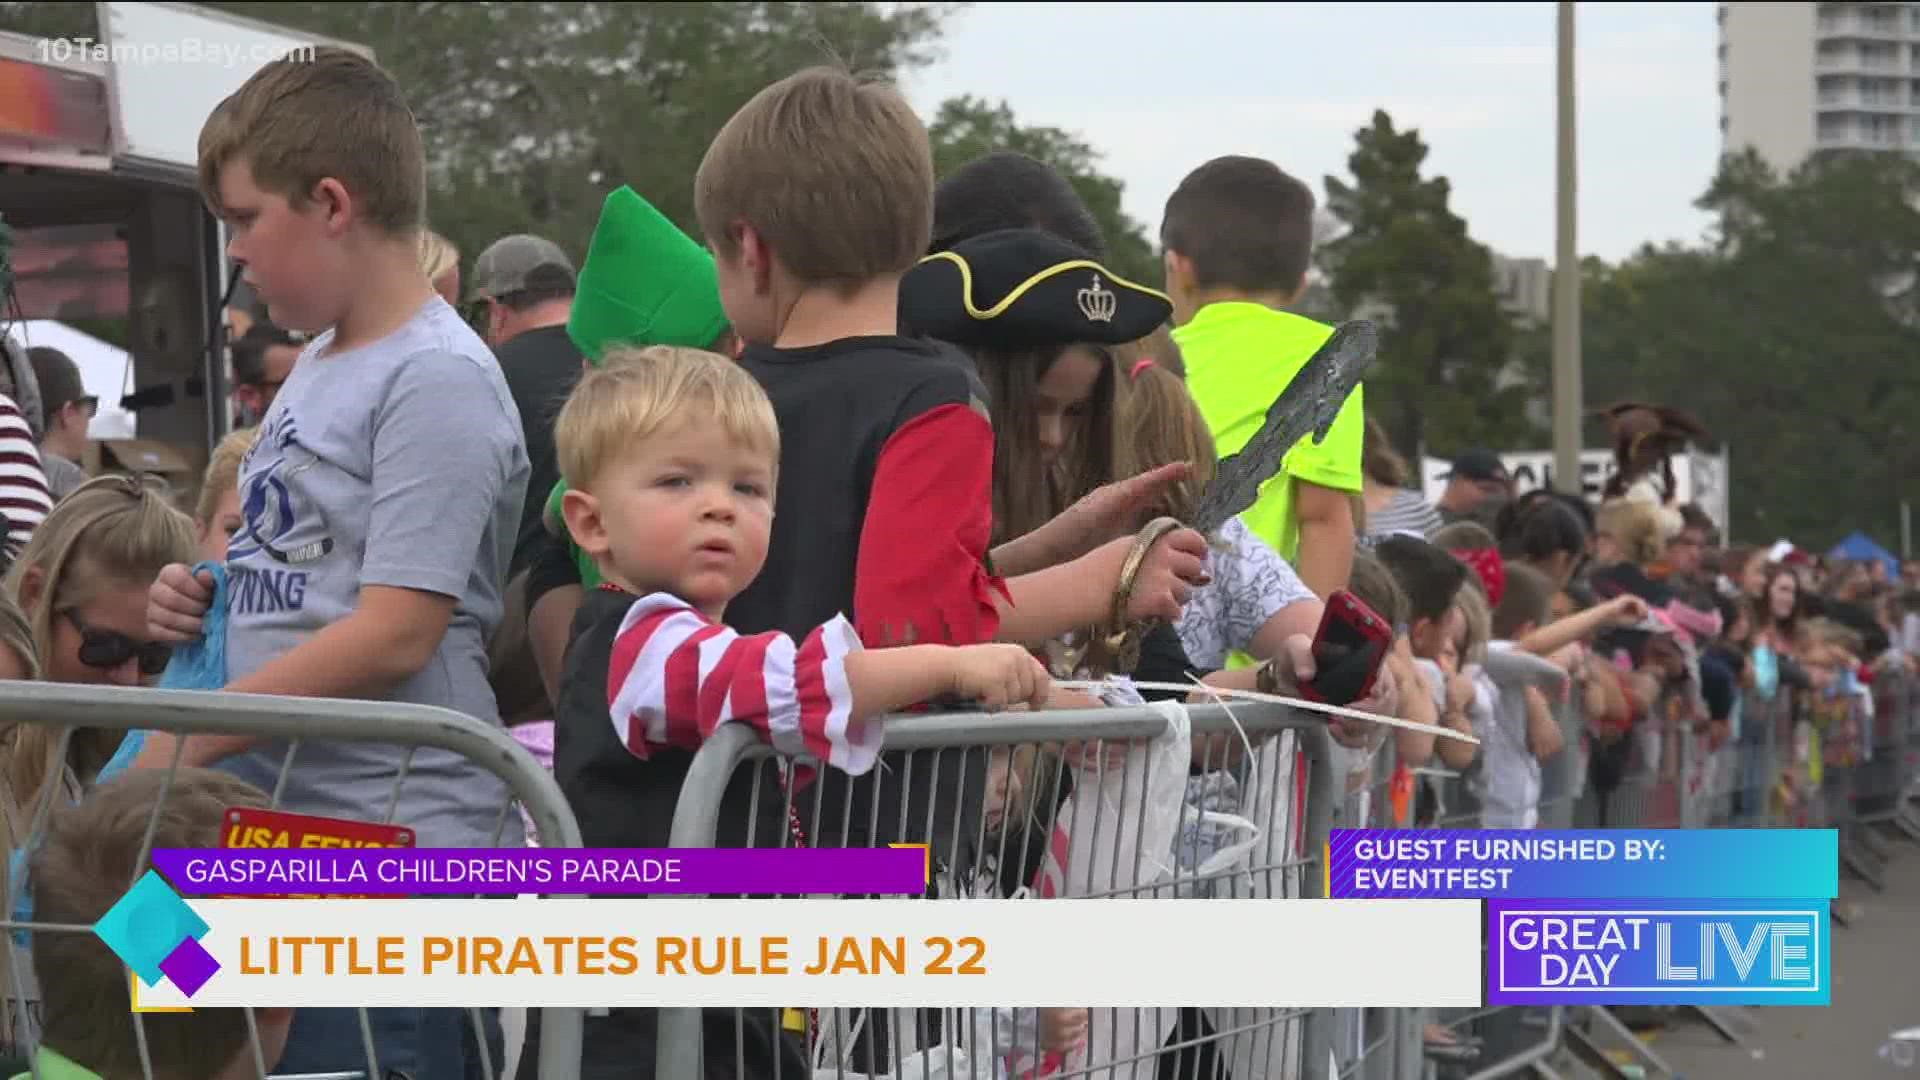 The Gasparilla Children’s parade is right around the corner and we have everything you need to know to plan your day.